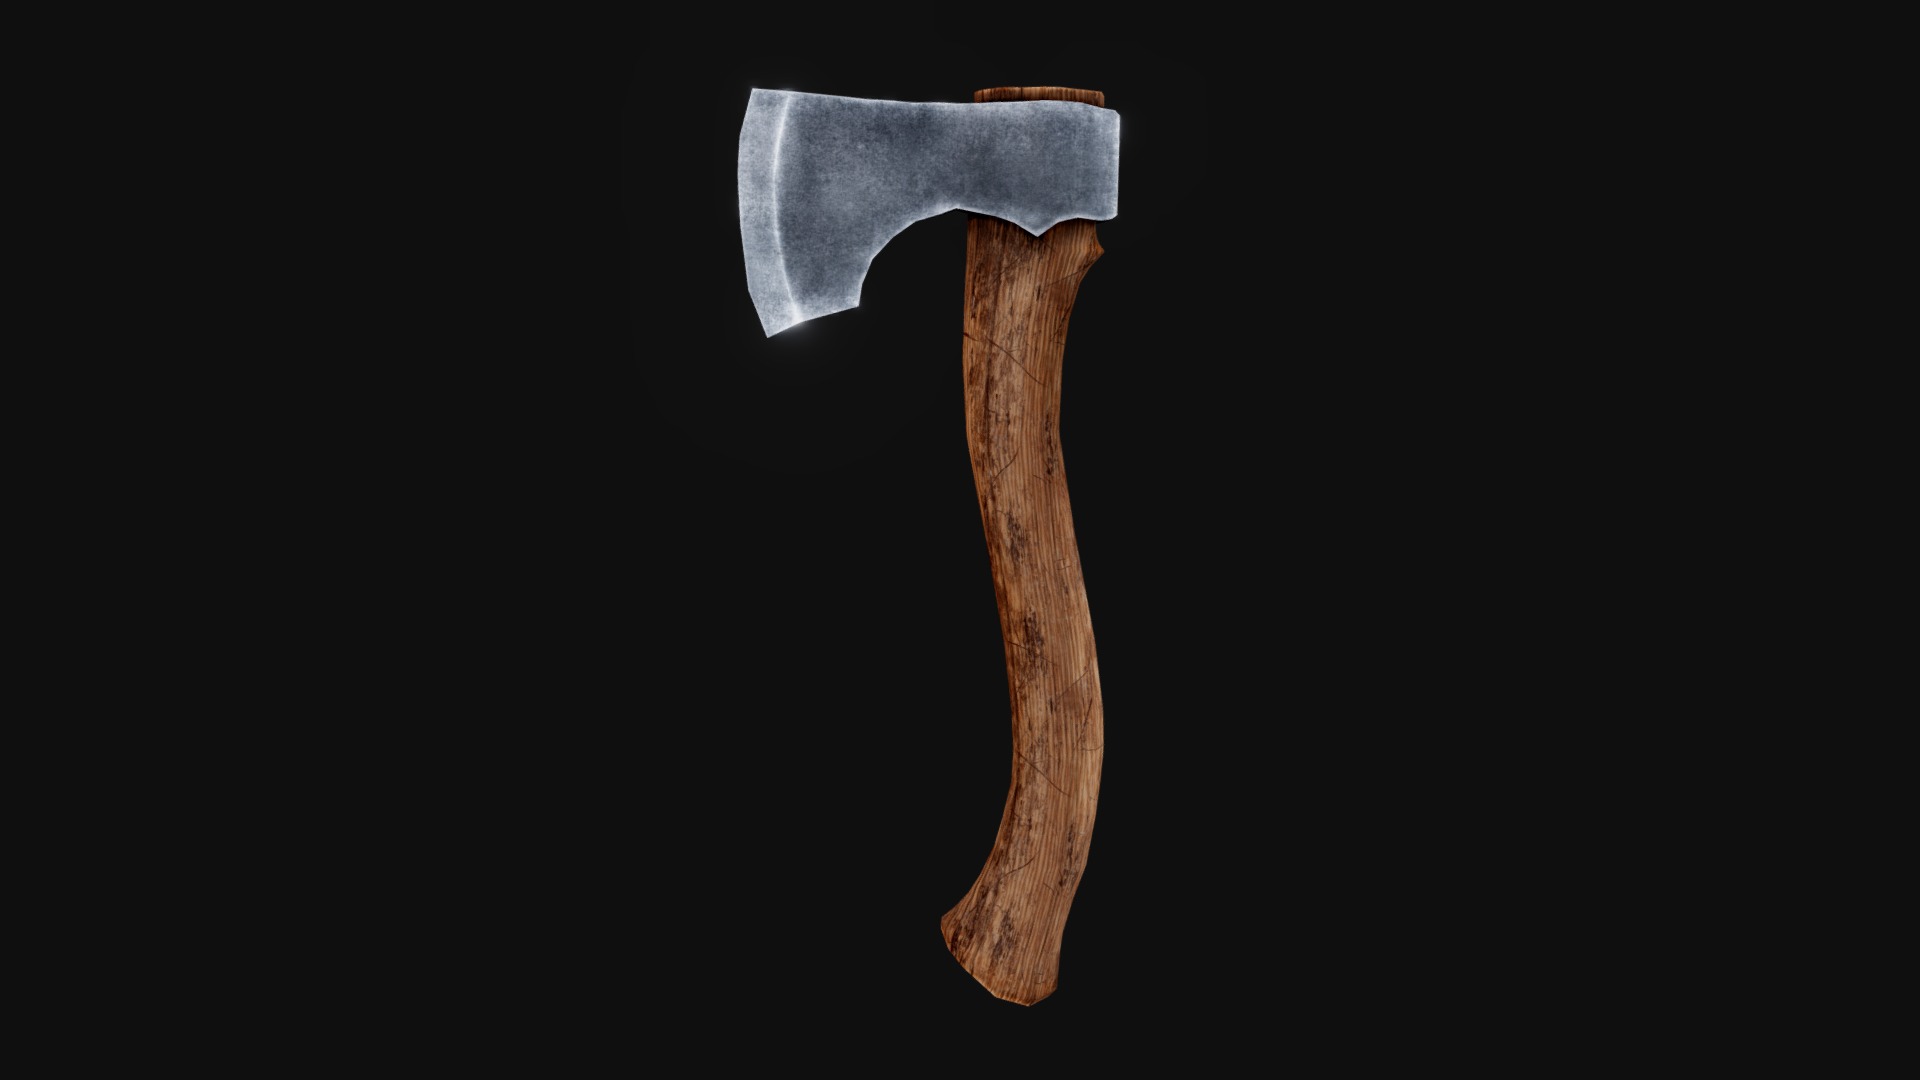 3D model Northlander Hatchet - This is a 3D model of the Northlander Hatchet. The 3D model is about a wooden axe with a black background.